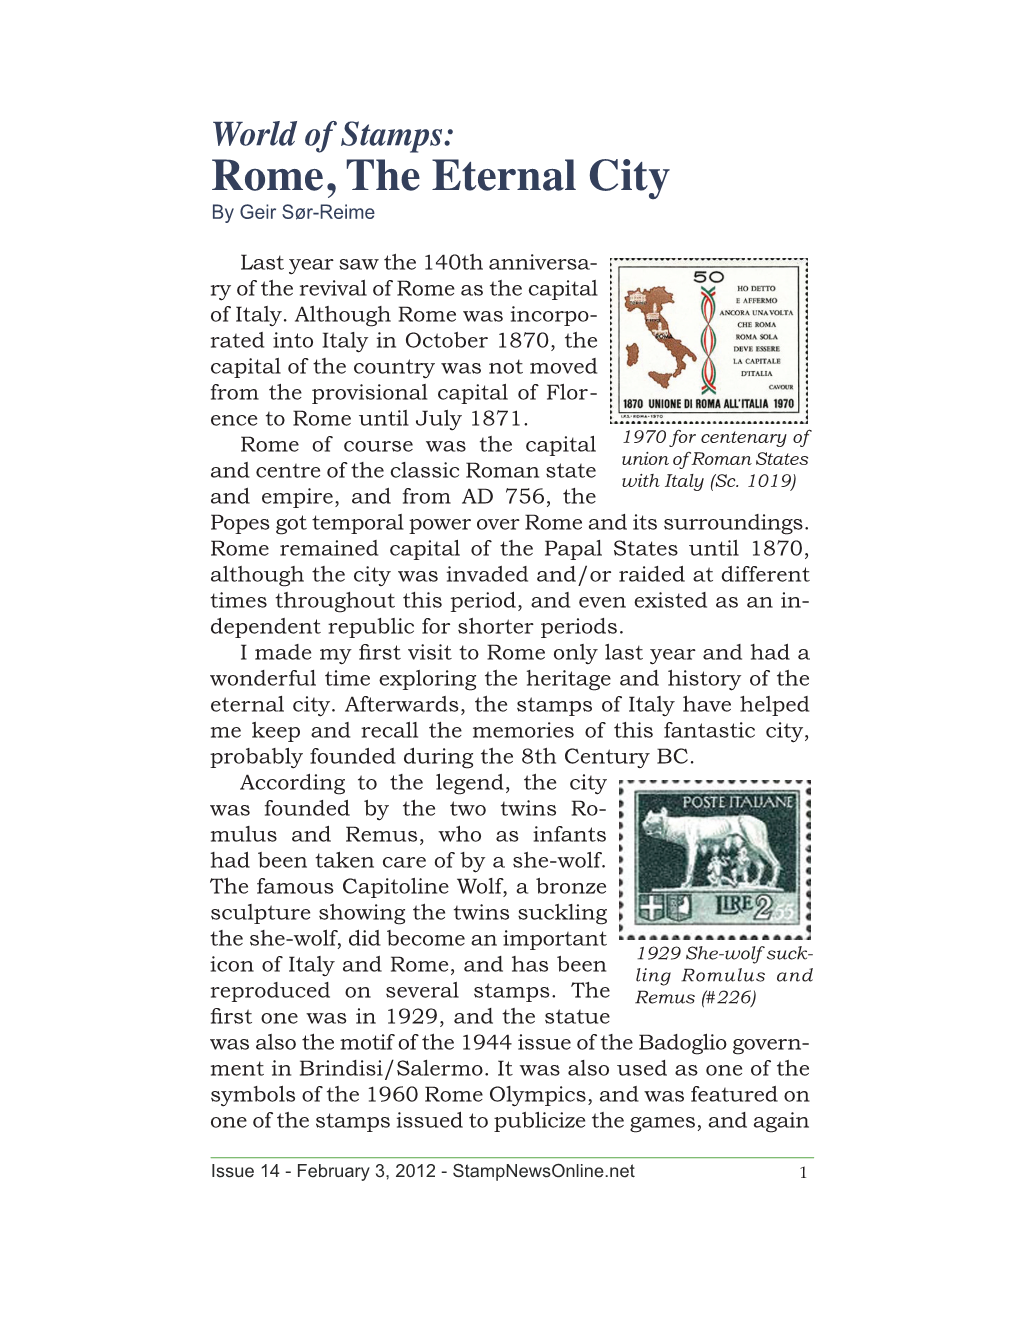 World of Stamps: Rome, the Eternal City by Geir Sør-Reime